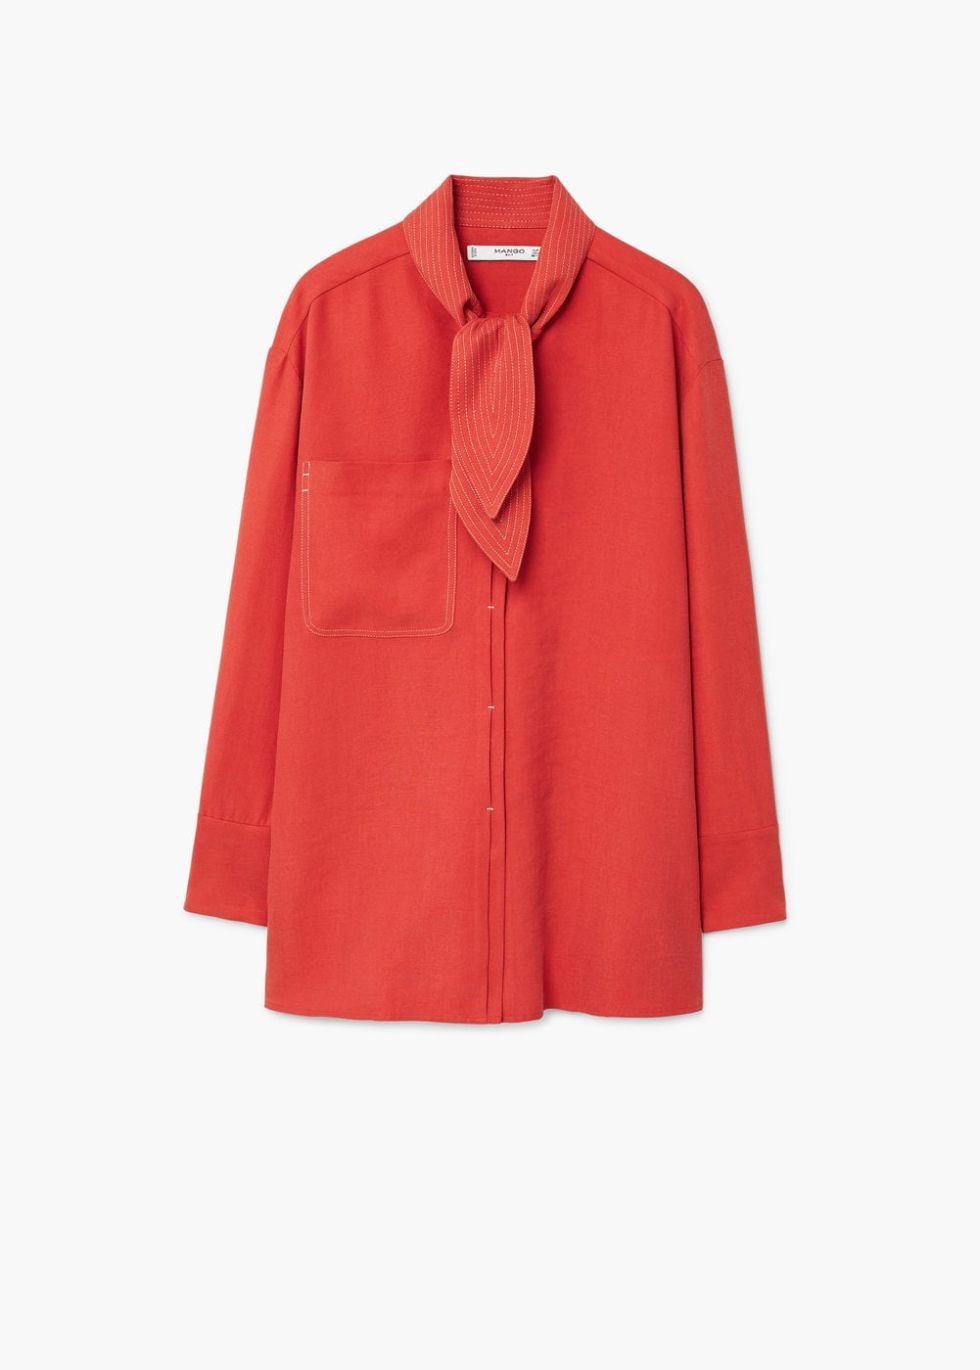 Clothing, Outerwear, Red, Sleeve, Collar, Orange, Blouse, Button, Coat, Neck, 